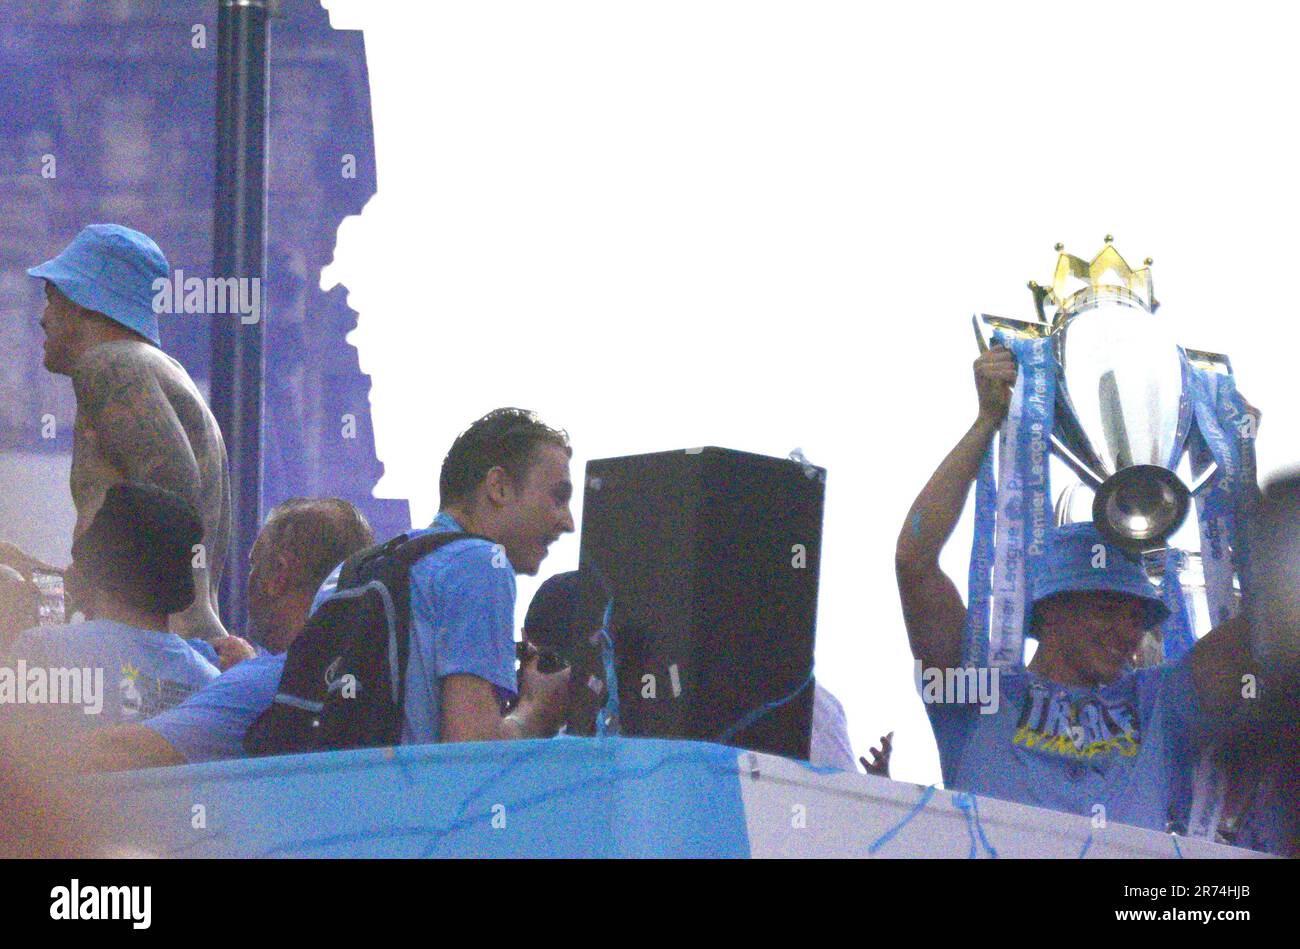 Manchester, UK. 12th June, 2023. The cup held high on the open top bus. Open top bus victory parade celebration in central Manchester, UK, to mark the achievement of their club winning the treble: the Premier League, the FA Cup, and the Champions League. On Saturday Man City beat Inter Milan in Istanbul to secure the Champions League win. The parade of open top buses went through Manchester city centre watched by large, enthusiastic crowds, despite a thunderstorm and heavy rain. Credit: Terry Waller/Alamy Live News Stock Photo